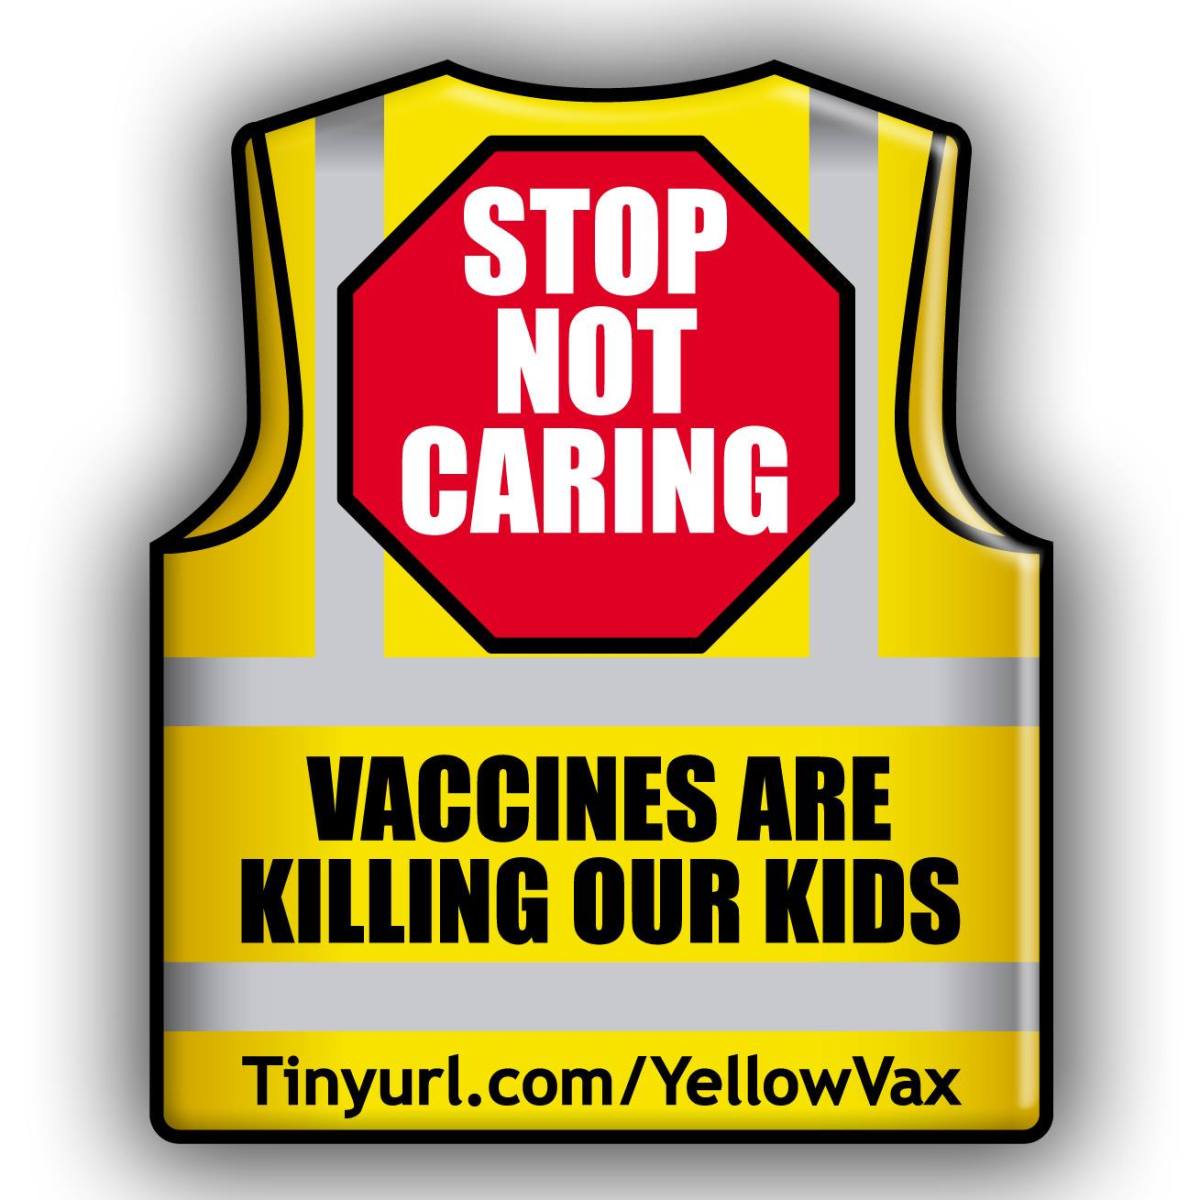 YELLOW VESTS Alert the World that “SIDS IS VIDS” (Vaccine Induced Death Syndrome) to Spare Children, Parents & Carers!